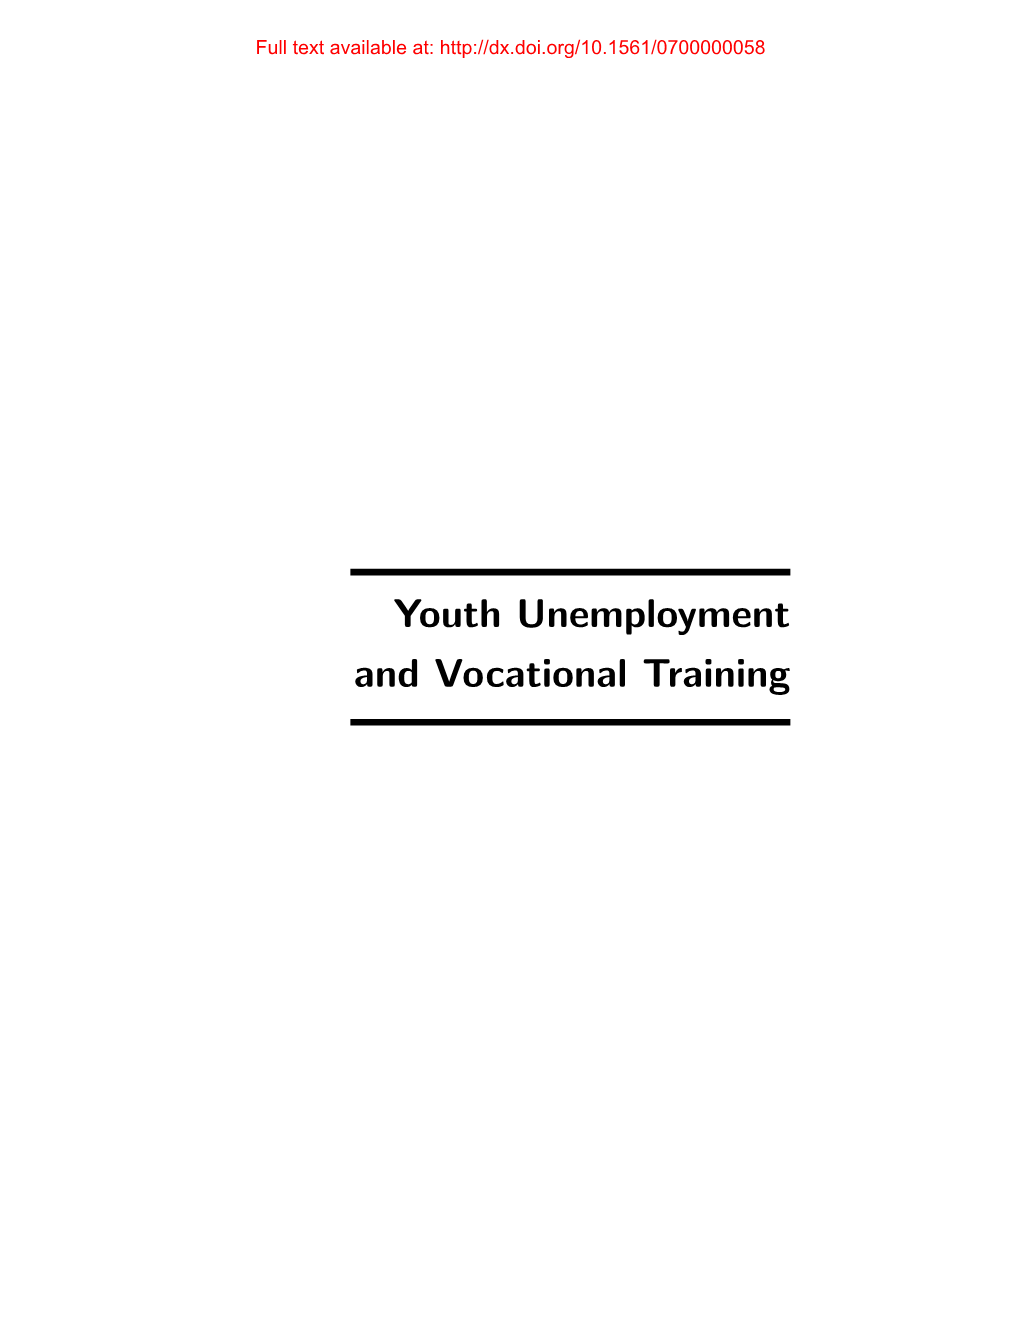 Youth Unemployment and Vocational Training Full Text Available At